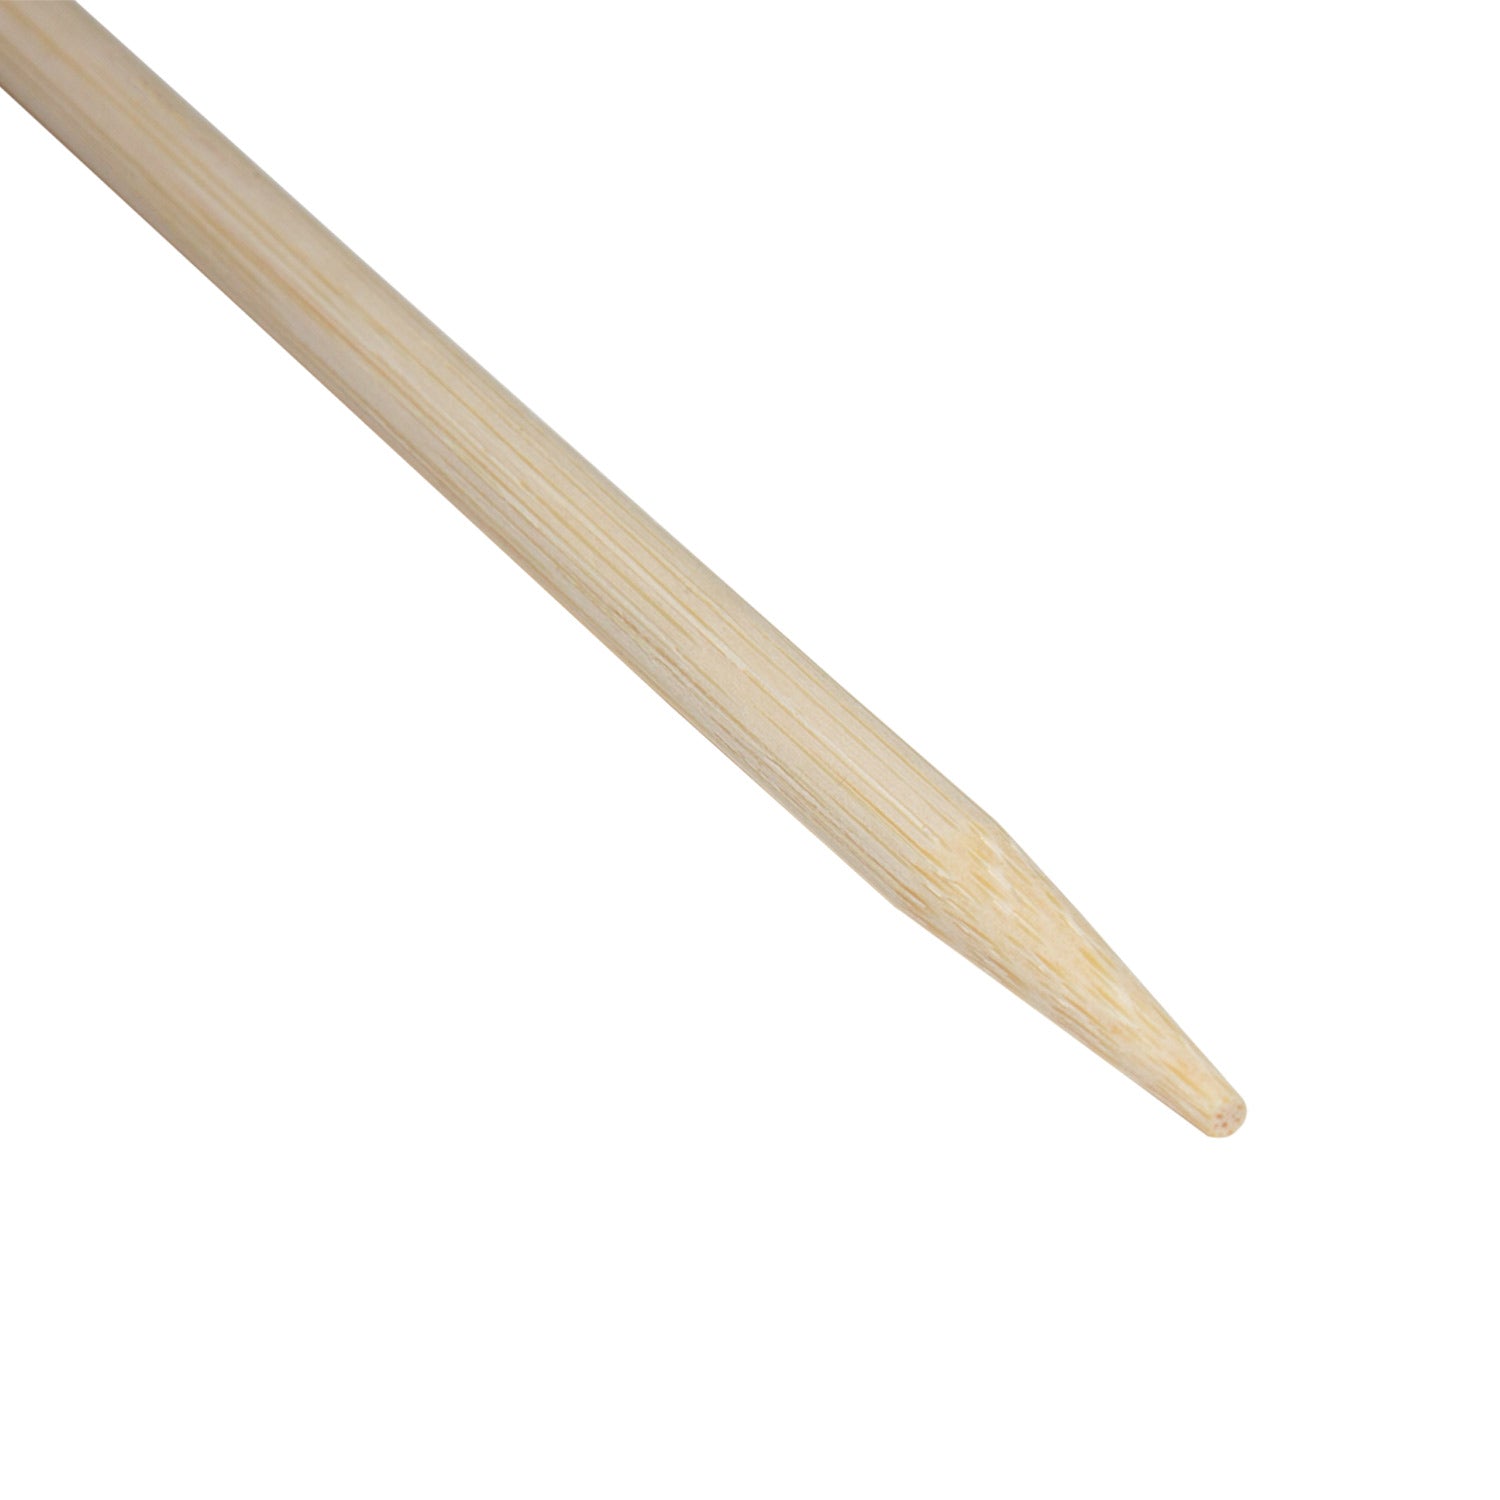 AC_ST5 Bamboo Sticks | Wooden Skewers for Corn Dogs, Candy Apples | 5.5-inch